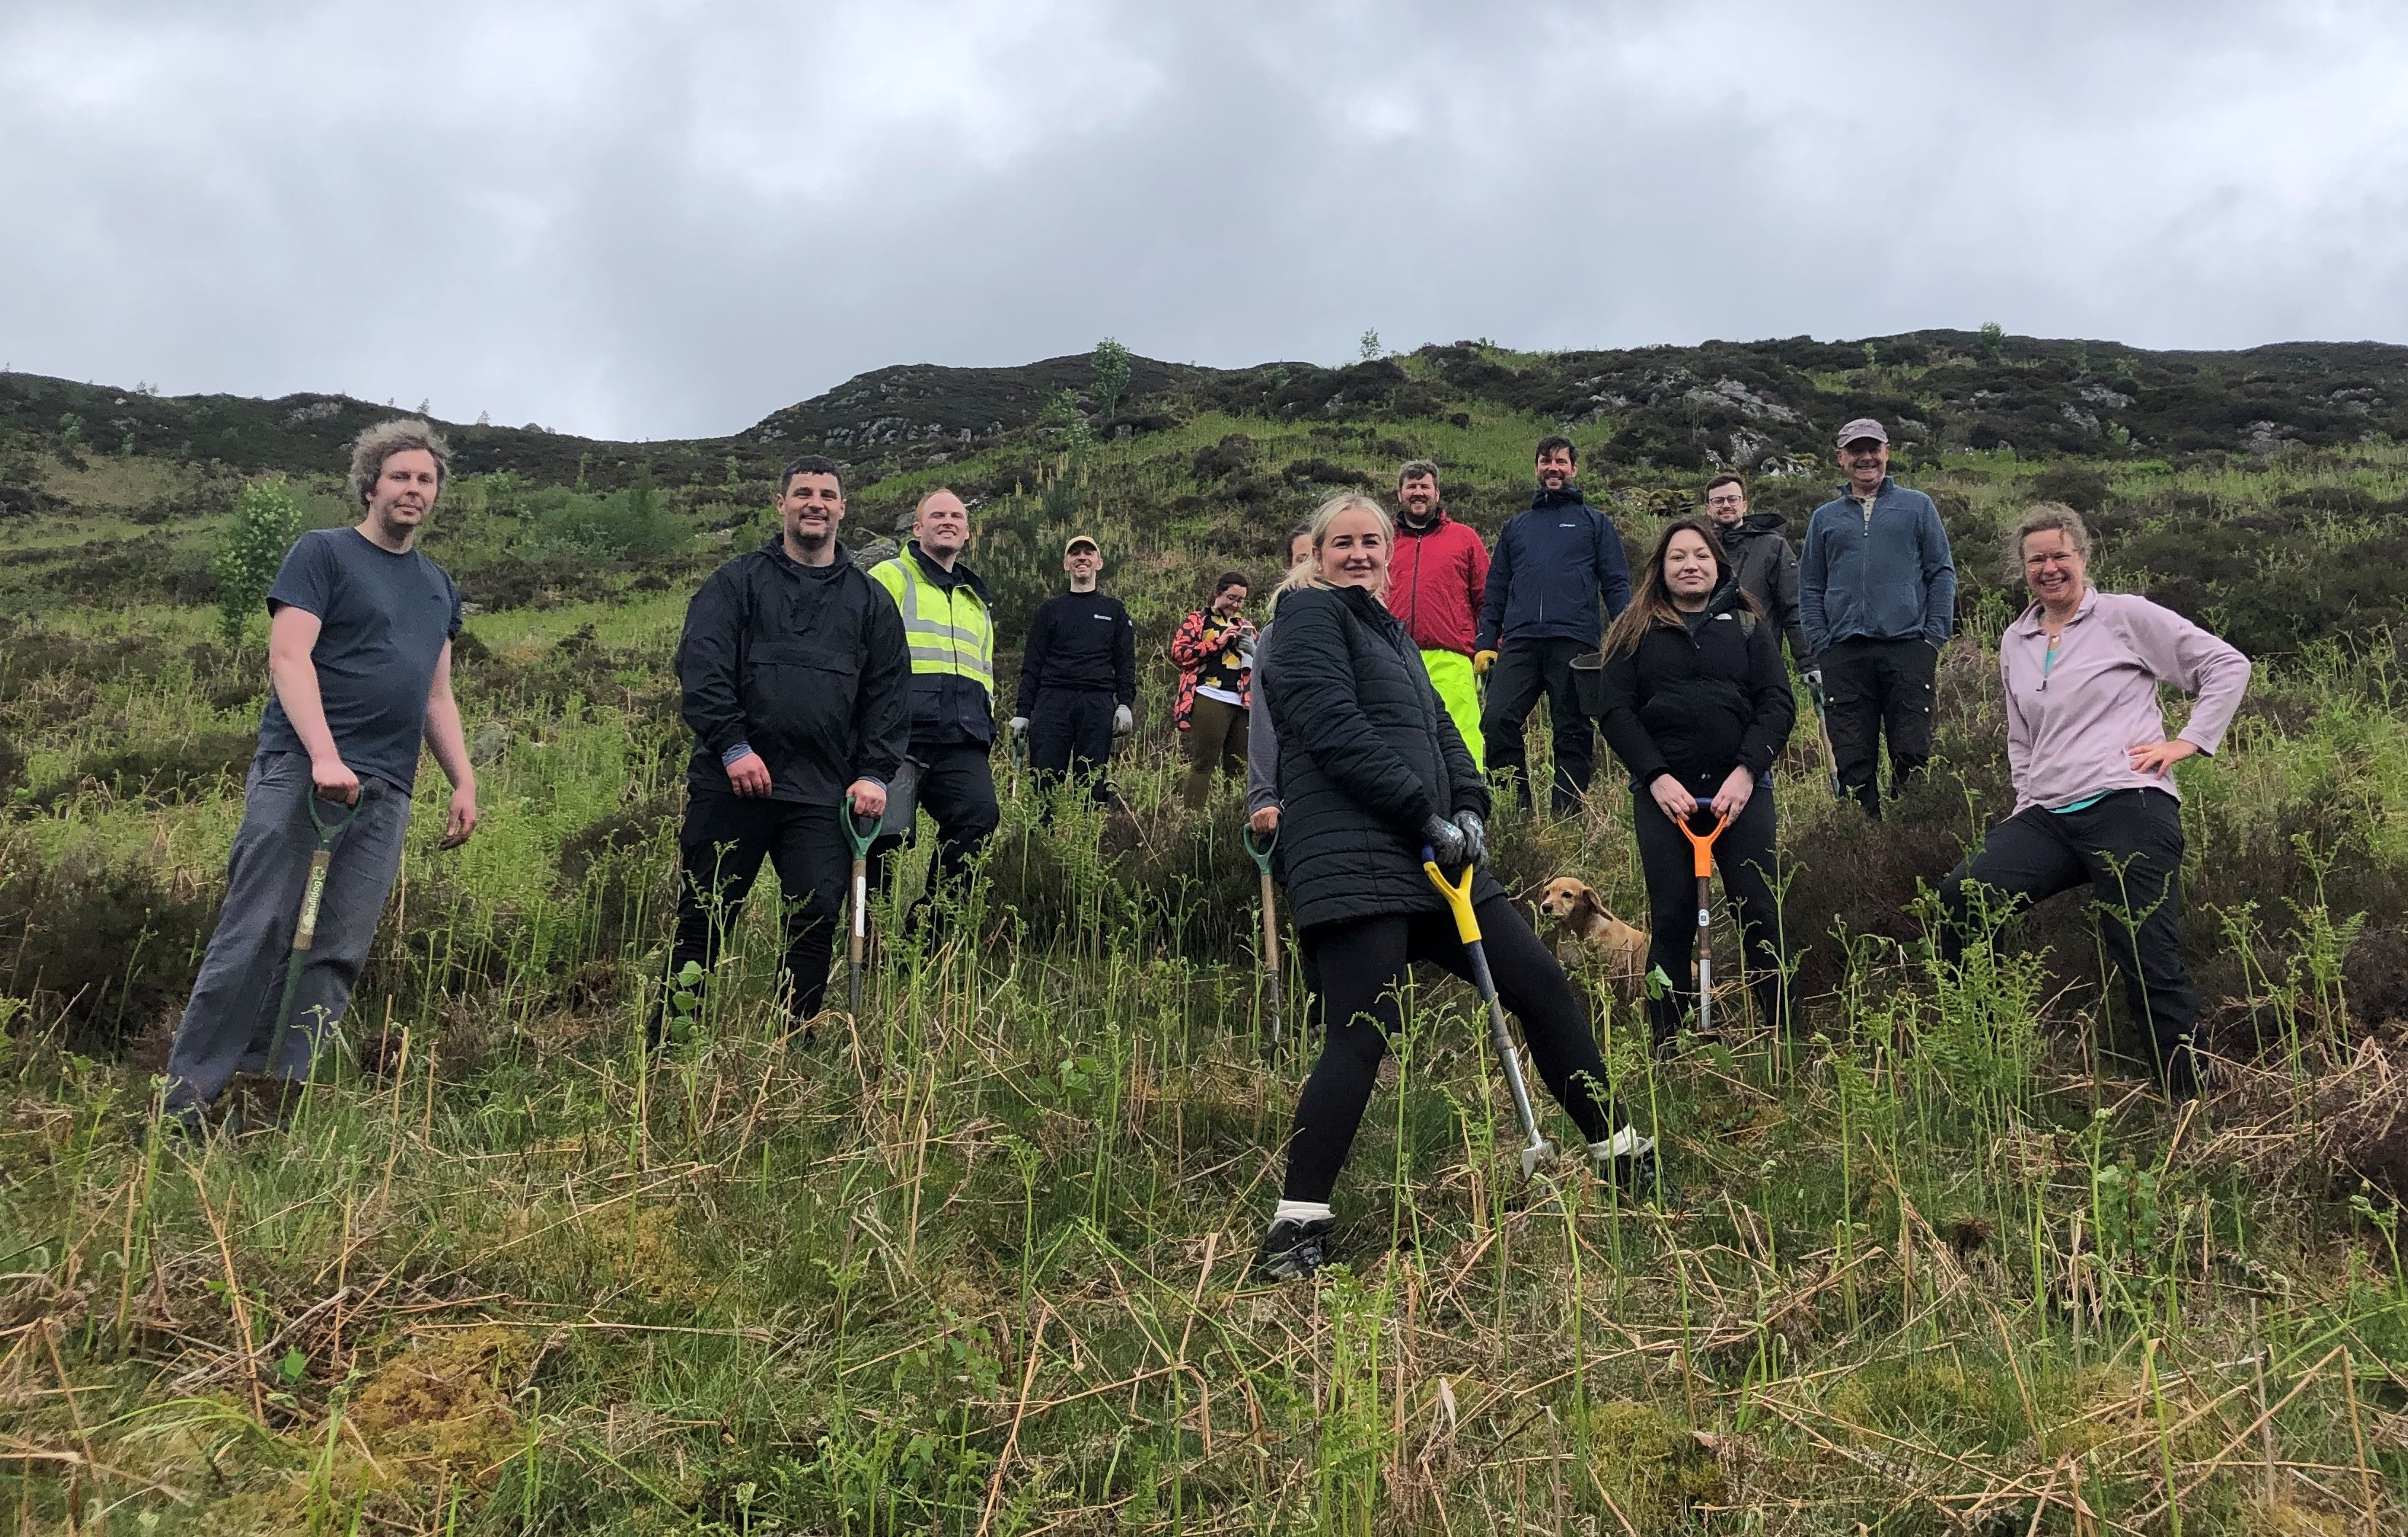 The team of volunteers helped plant over 200 trees at Dun Coillich